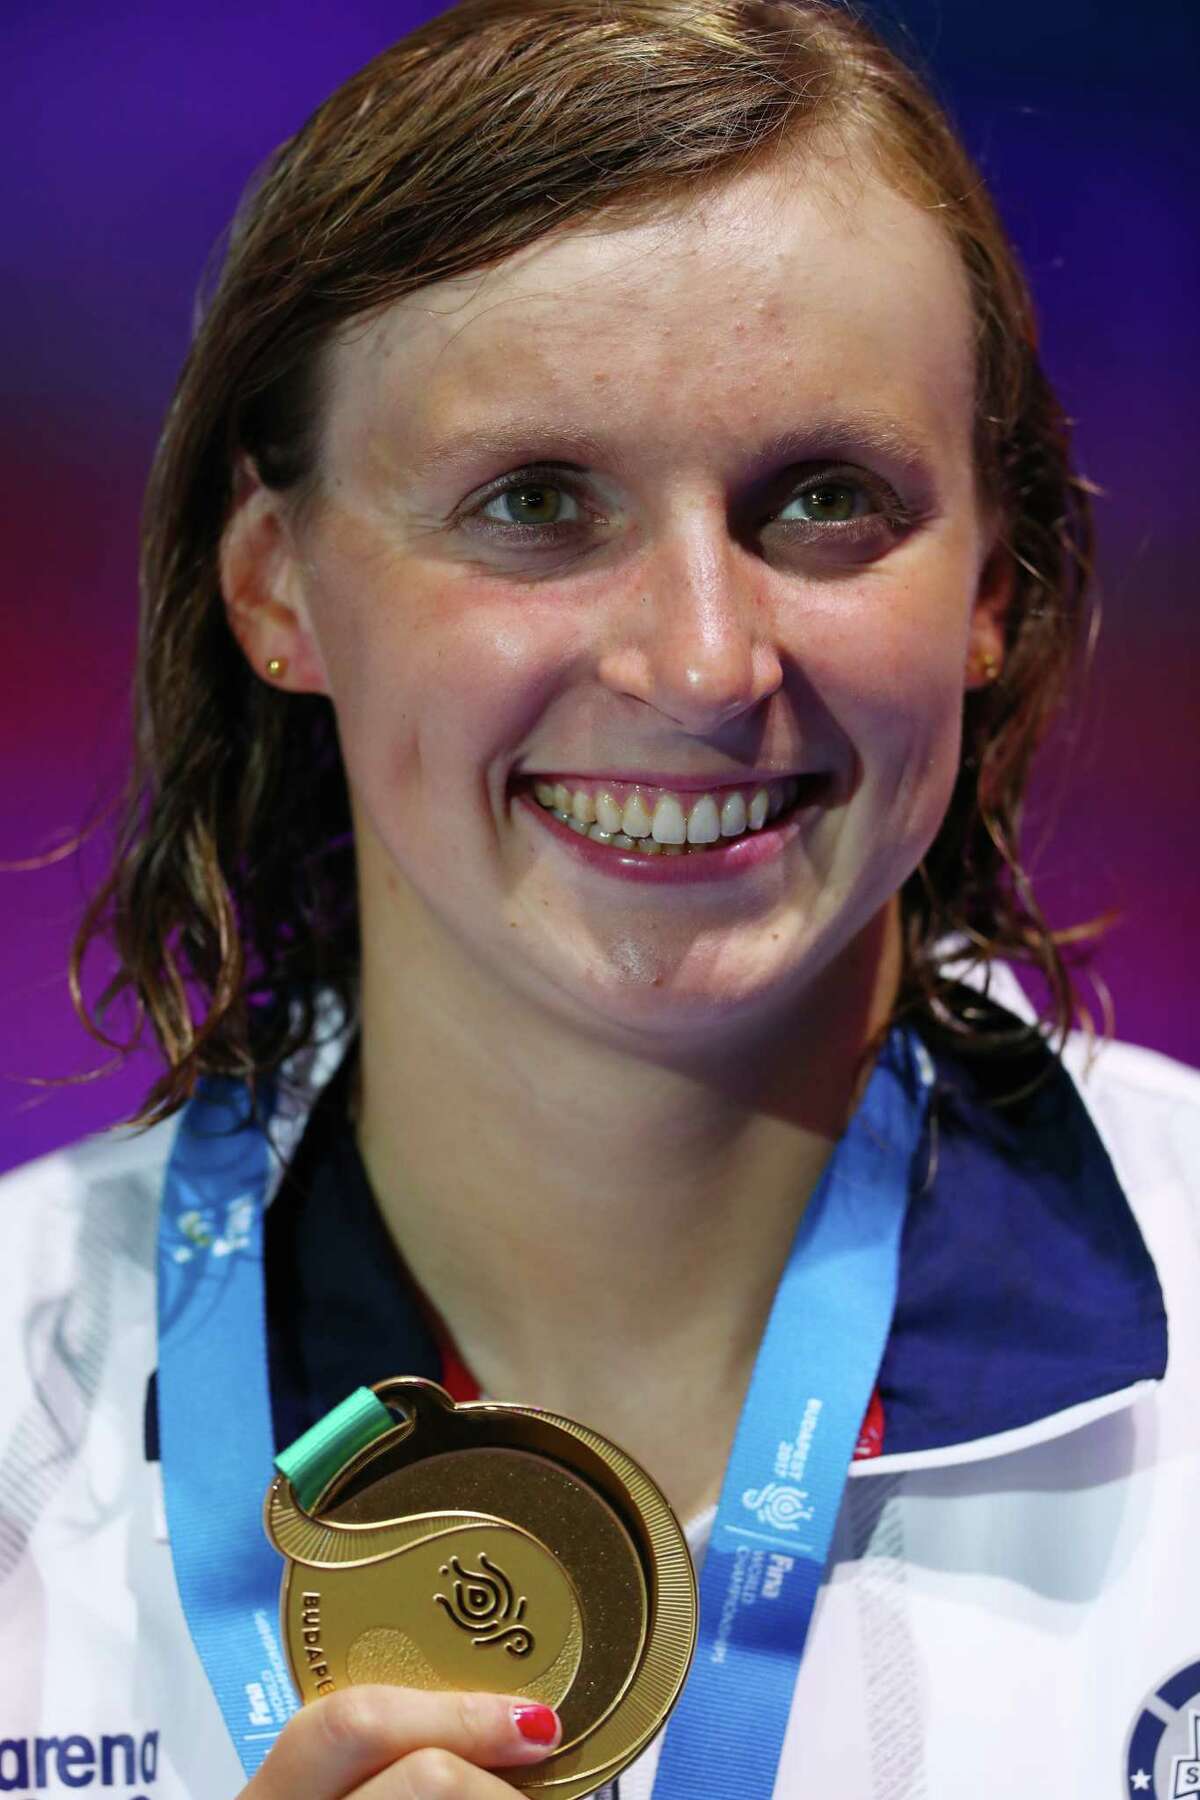 BUDAPEST, HUNGARY - JULY 23: Katie Ledecky of the United States celebrates winning the Women's 4x100m Freestyle Final on day ten of the Budapest 2017 FINA World Championships on July 23, 2017 in Budapest, Hungary (Photo by Clive Rose/Getty Images) ORG XMIT: 700047475